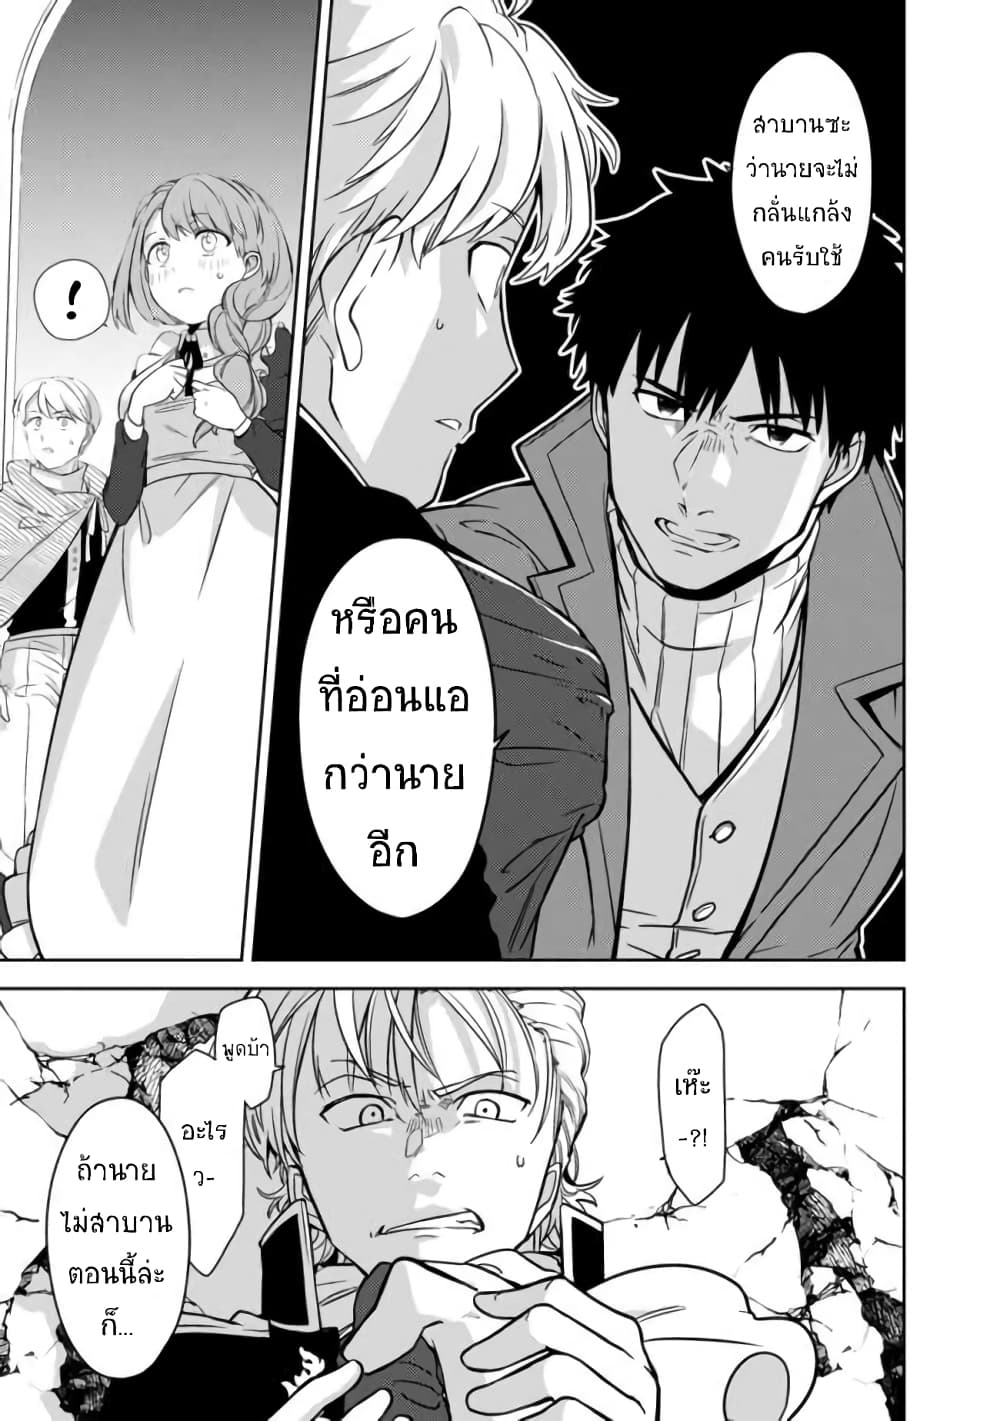 The Reincarnated Swordsman With 9999 Strength Wants to Become a Magician! ตอนที่ 1. 2 (21)